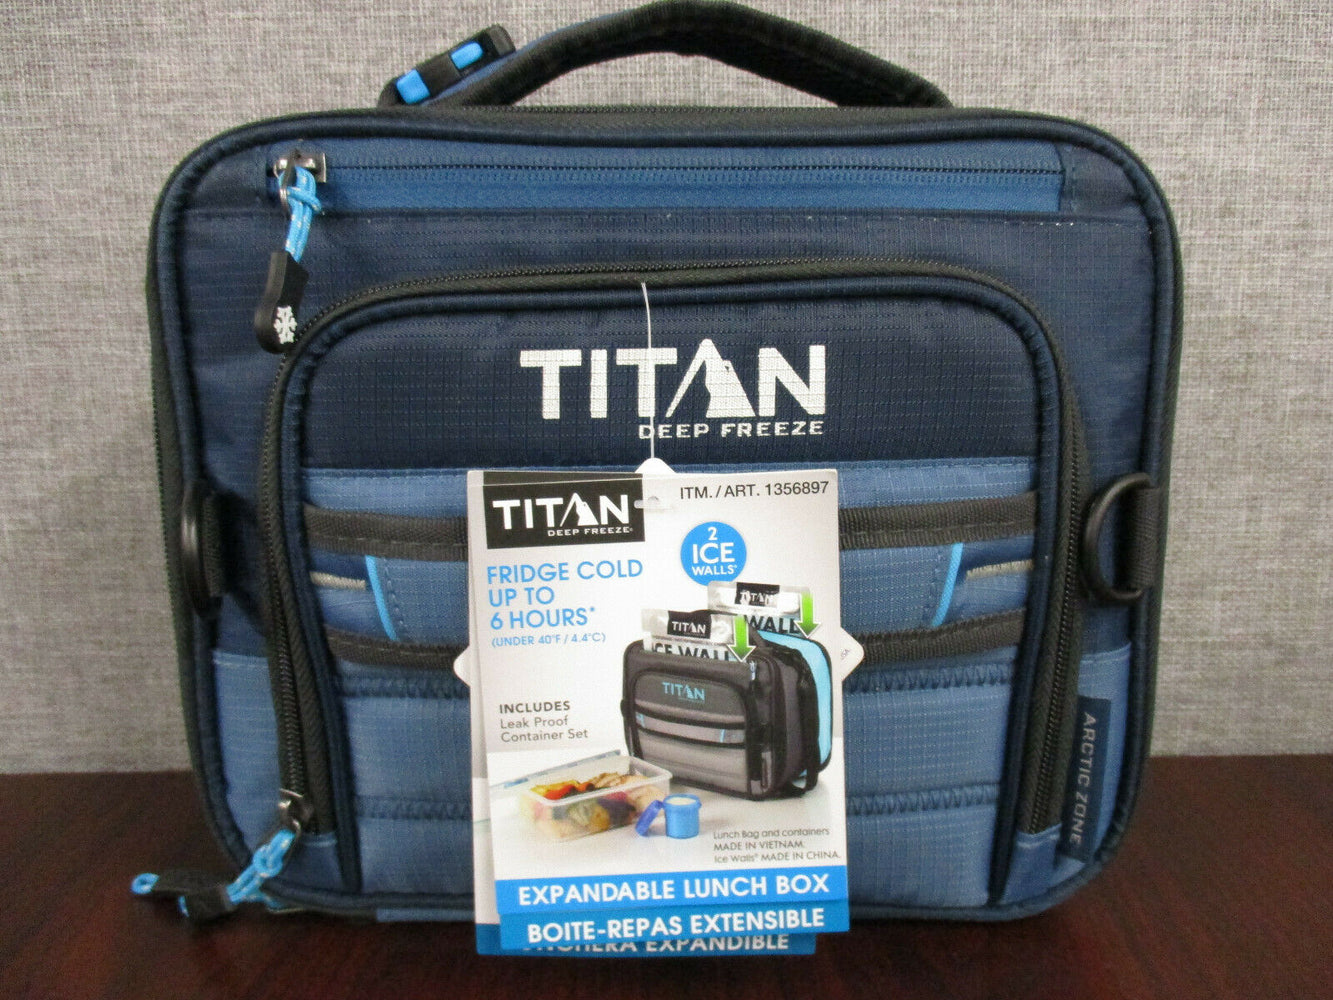 Titan Deep Freeze Expandable Lunch Box with 2 Ice Walls - Blue